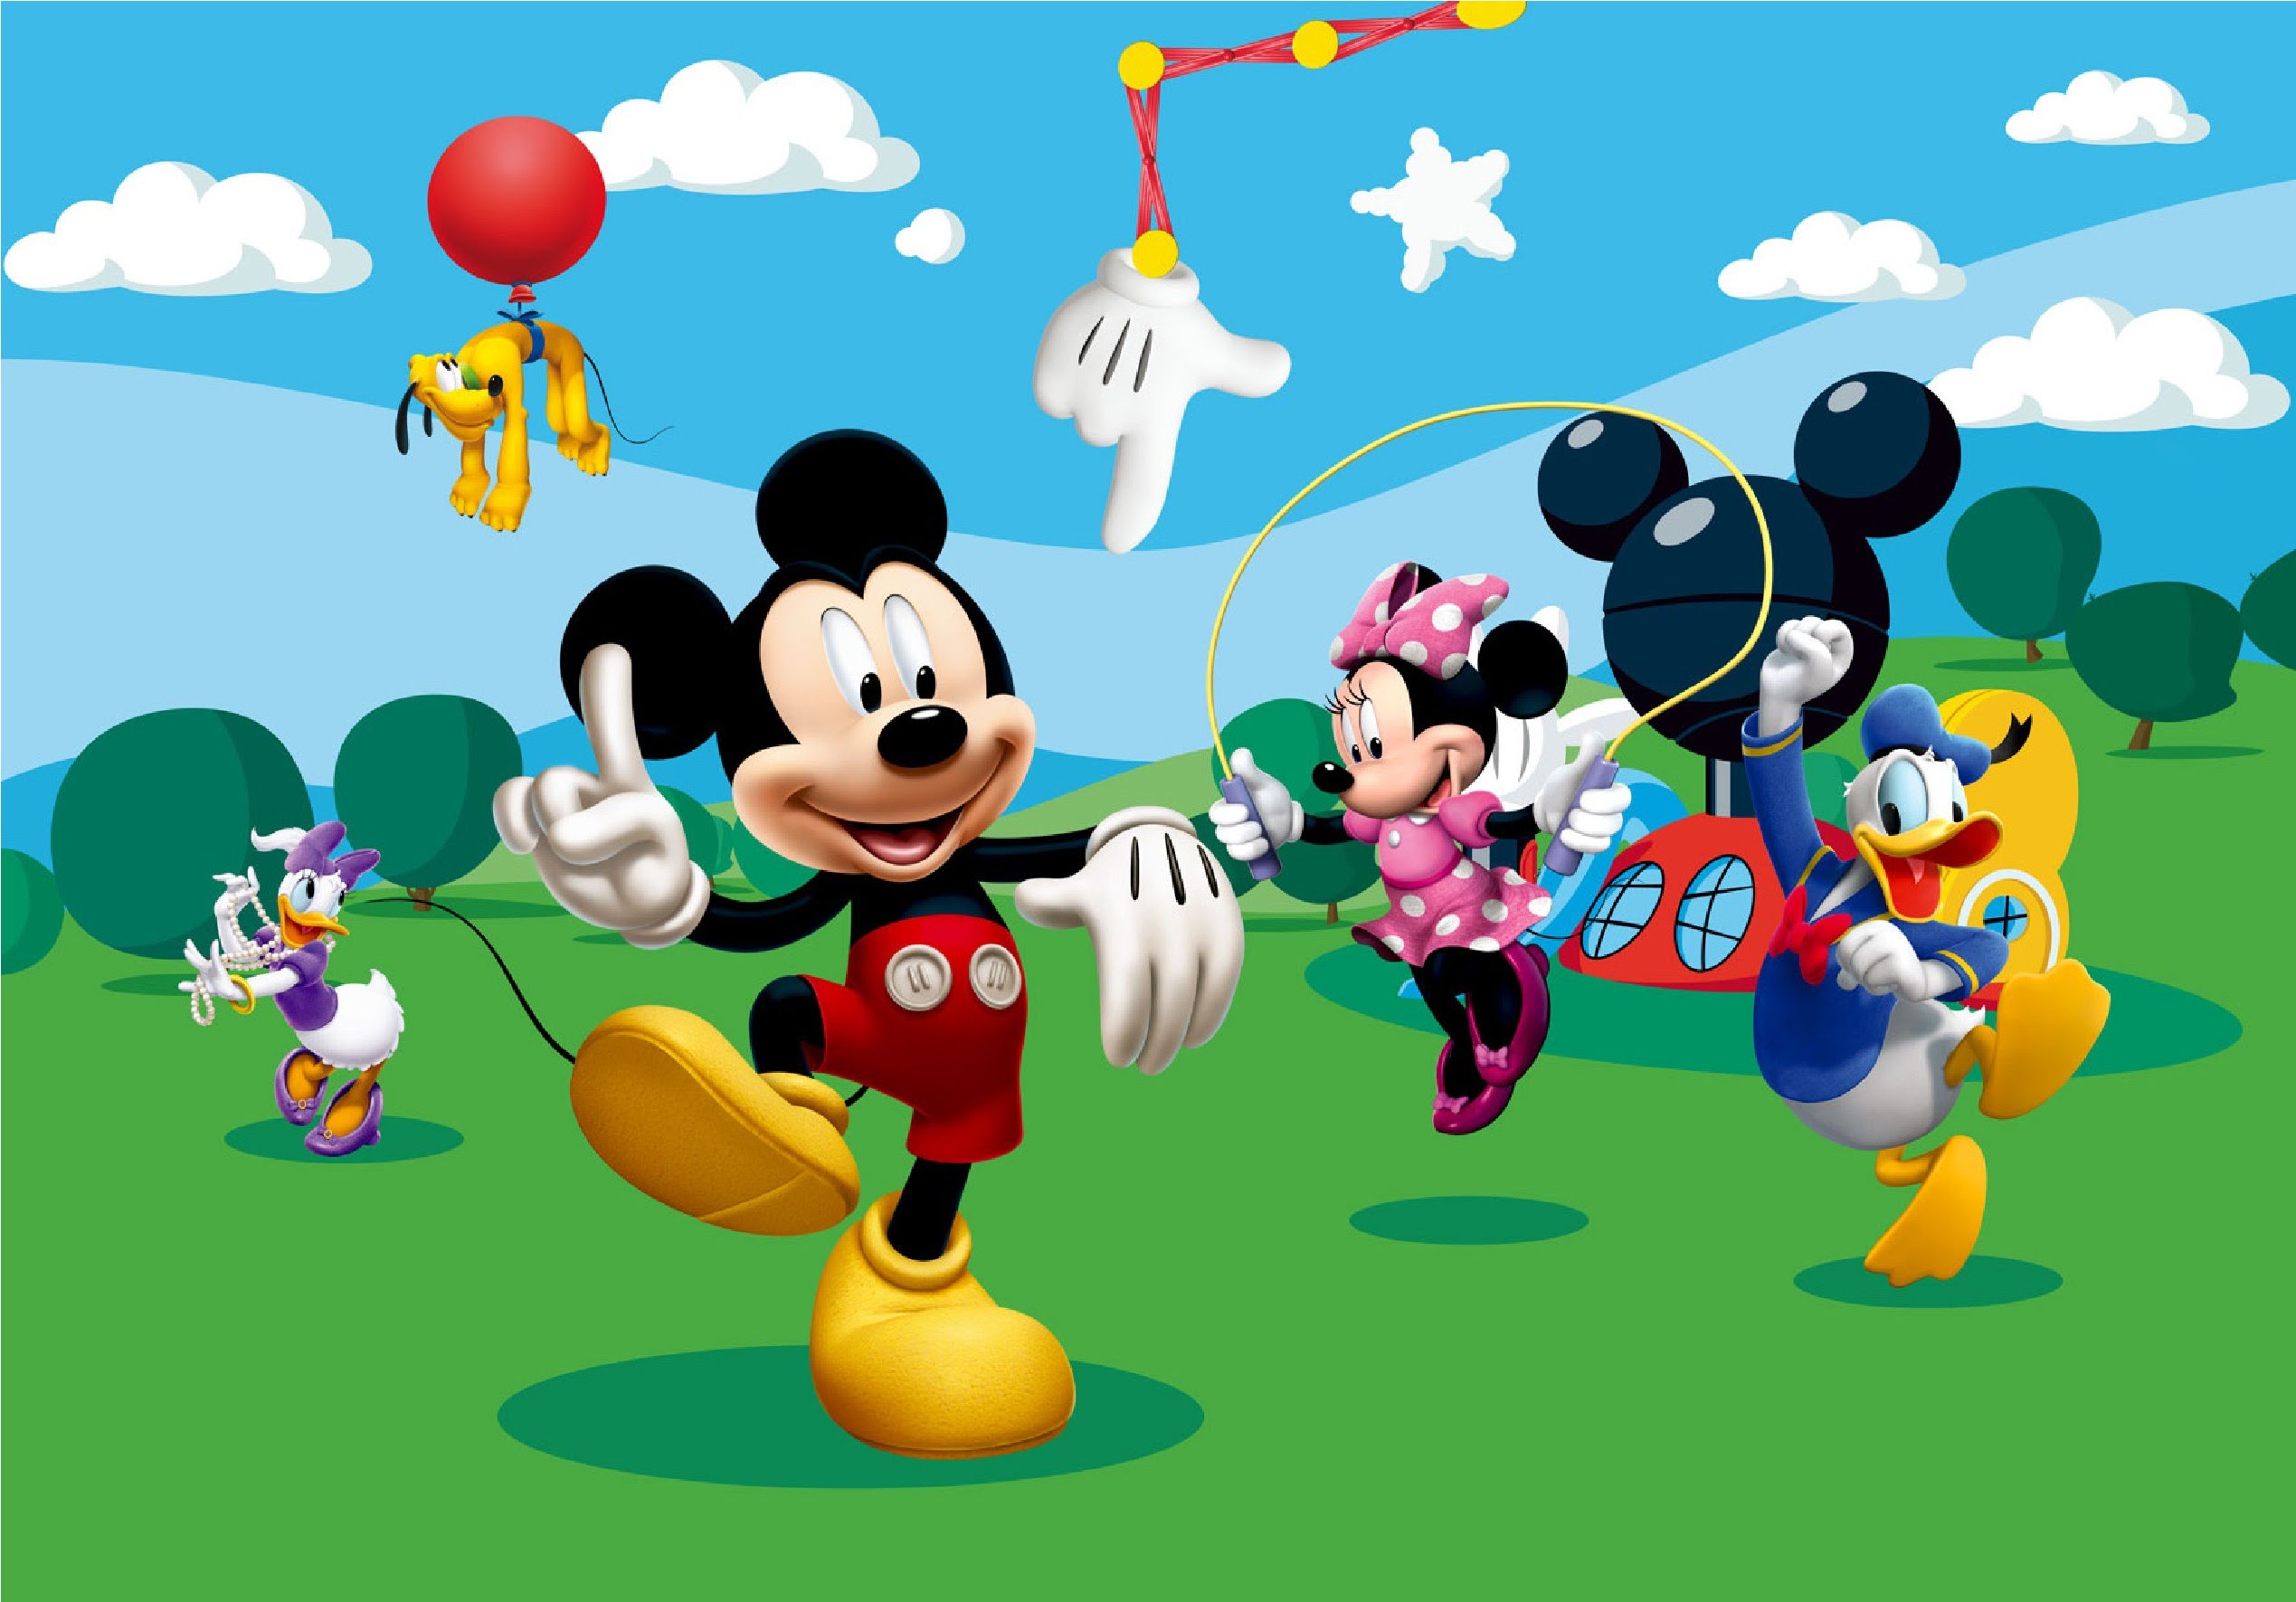 Clip Arts Related To : mickey from mickey mouse clubhouse. view all Mickey Mous...